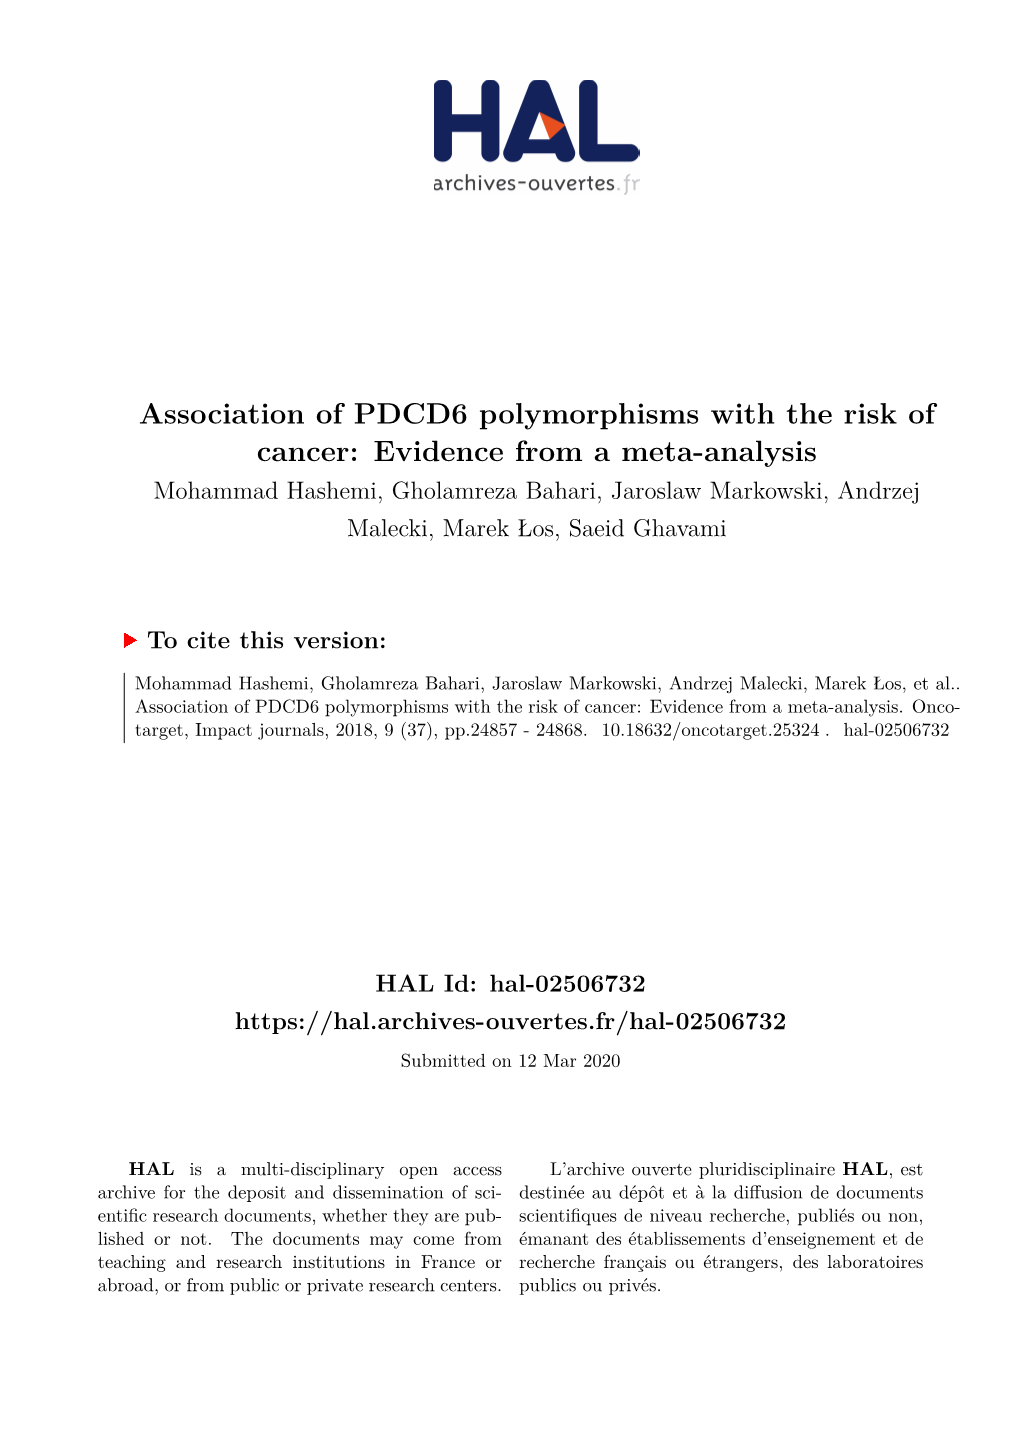 Association of PDCD6 Polymorphisms with the Risk of Cancer